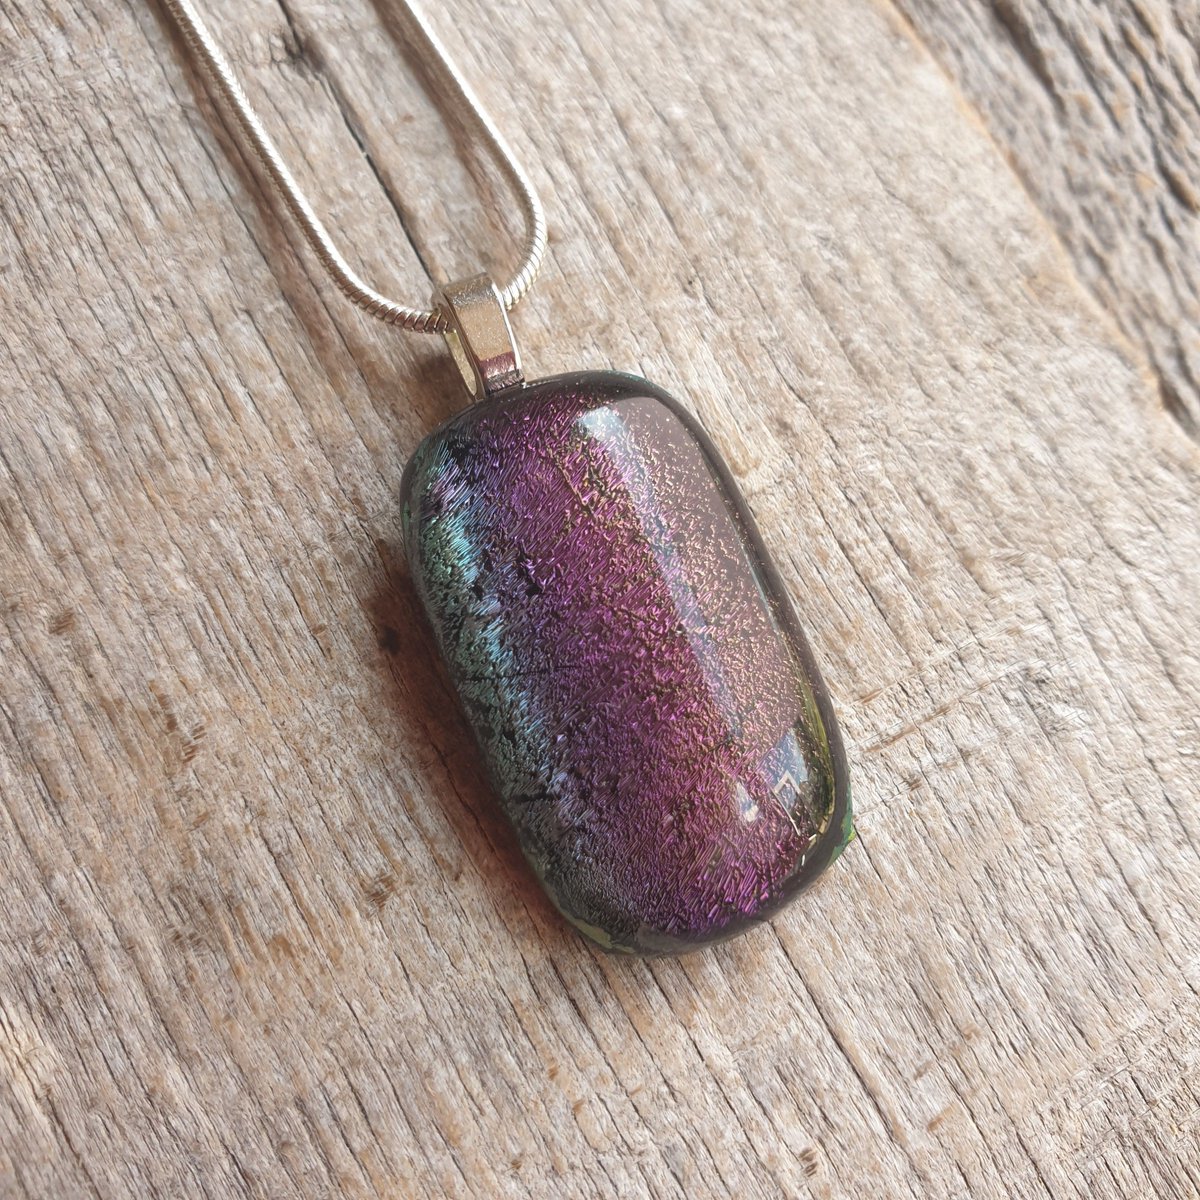 Amazing sparkling purples and greens within this unique handcrafted dichroic glass necklace. Stunning pendant. #handmade #etsy #giftideas #shopindie #etsyuk buff.ly/48CqYFg